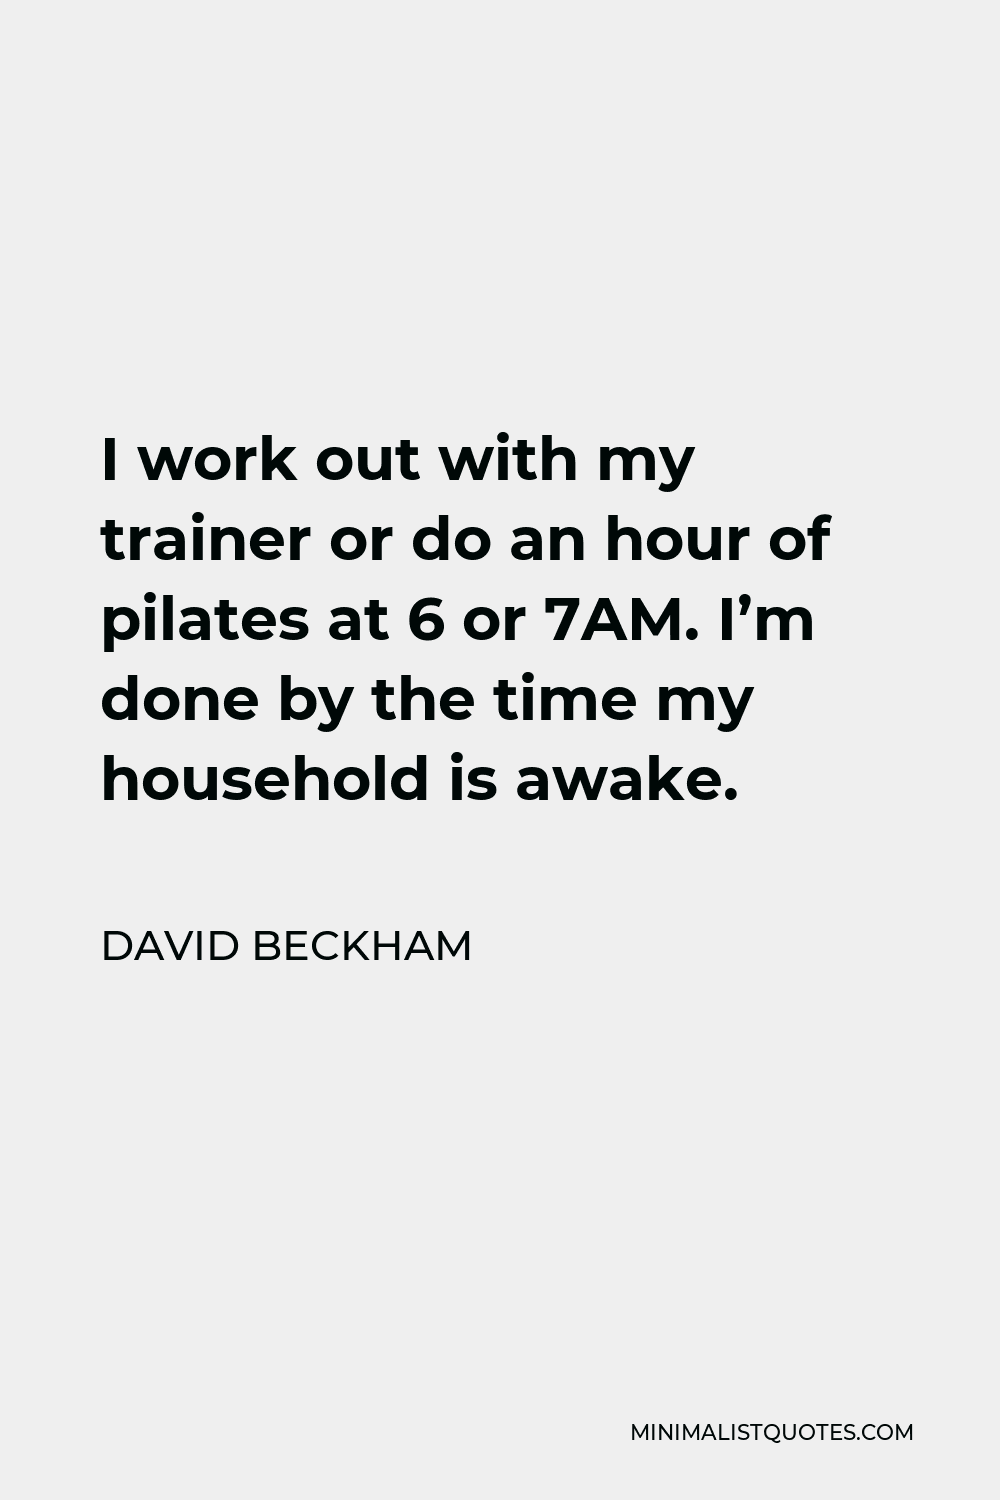 David Beckham Quote - I work out with my trainer or do an hour of pilates at 6 or 7AM. I’m done by the time my household is awake.